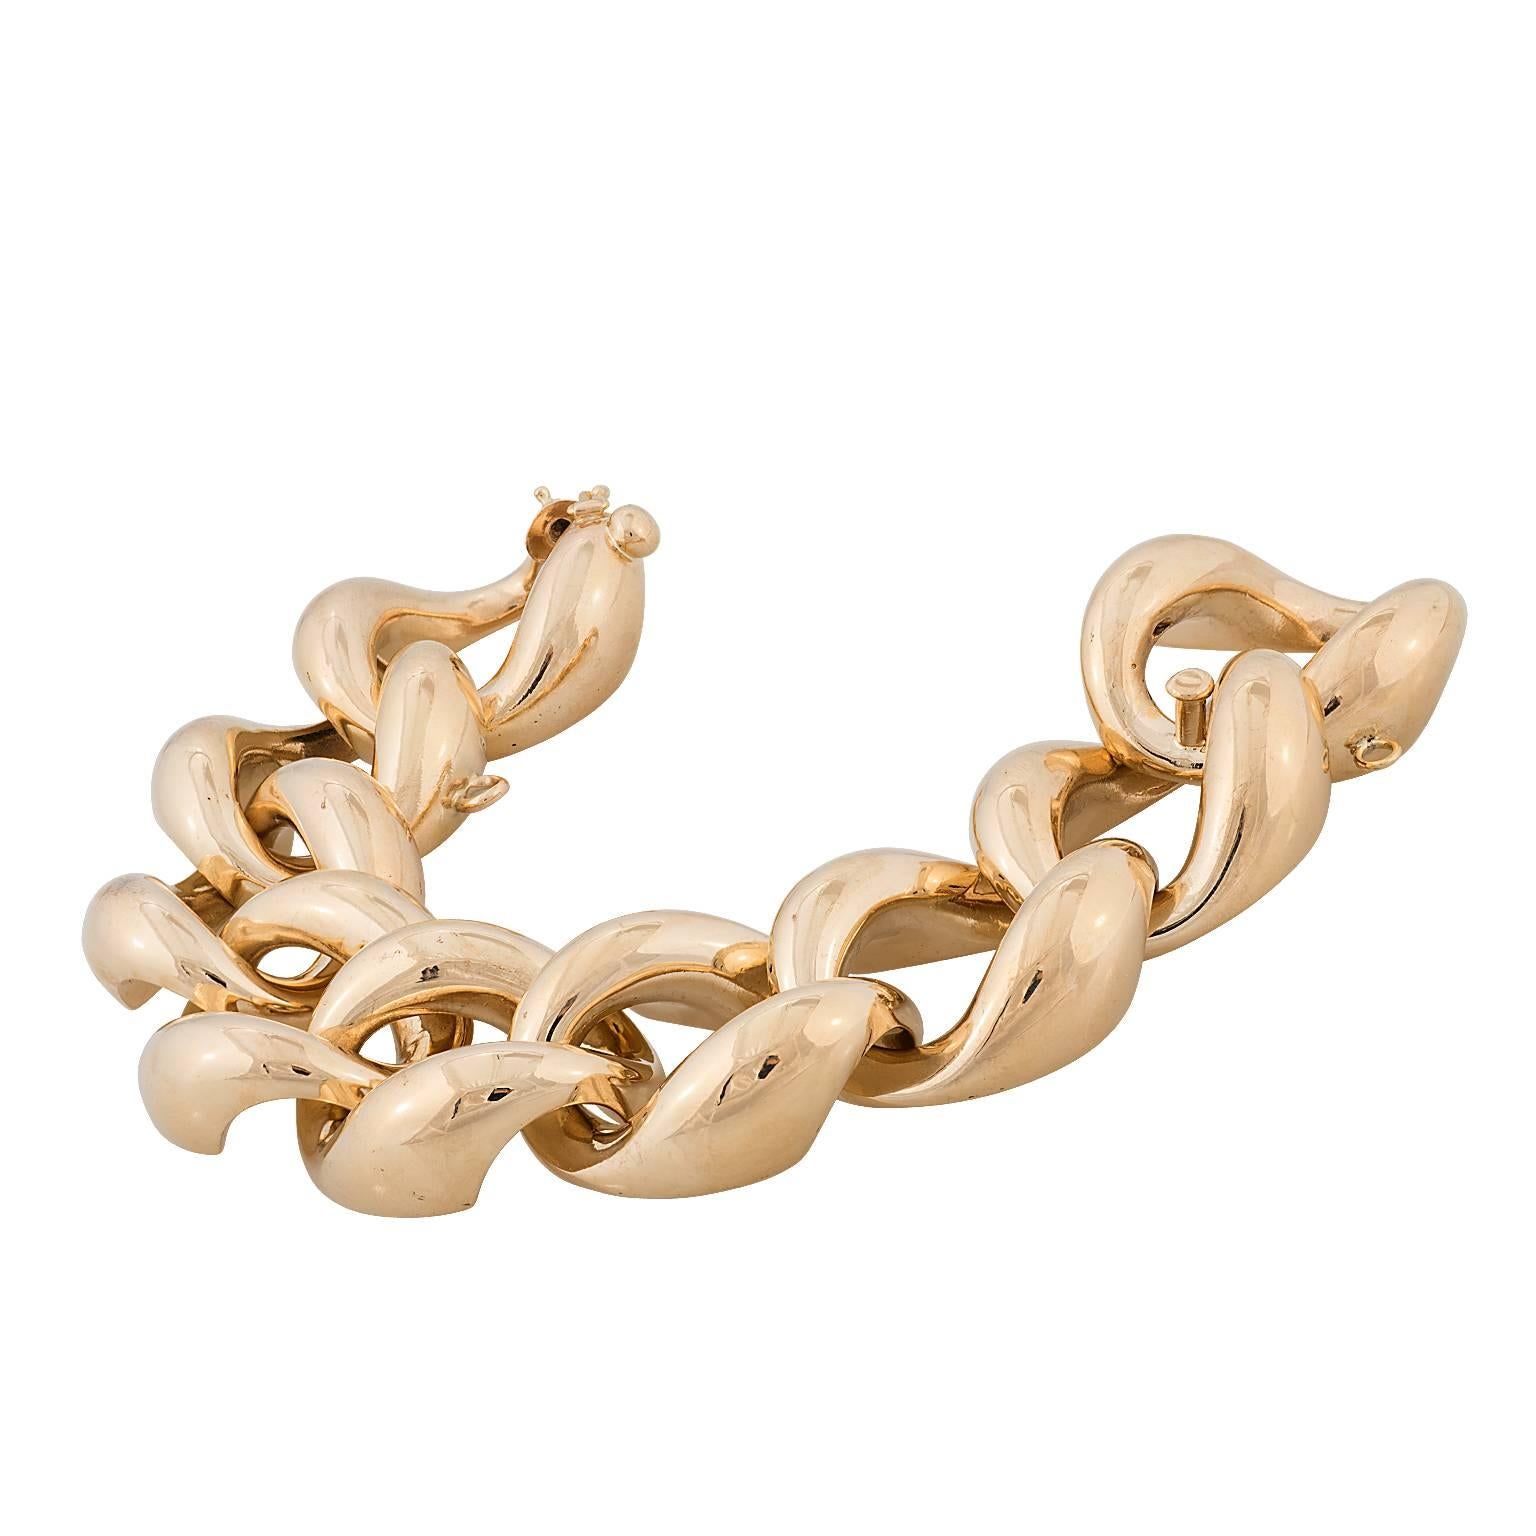 Tiffany & Co. 14 karat yellow gold large link bracelet.  The bracelet is made up of solid interlocking links, weighing 113 grams.  signed Tiffany & co.

Hallmark:  14K